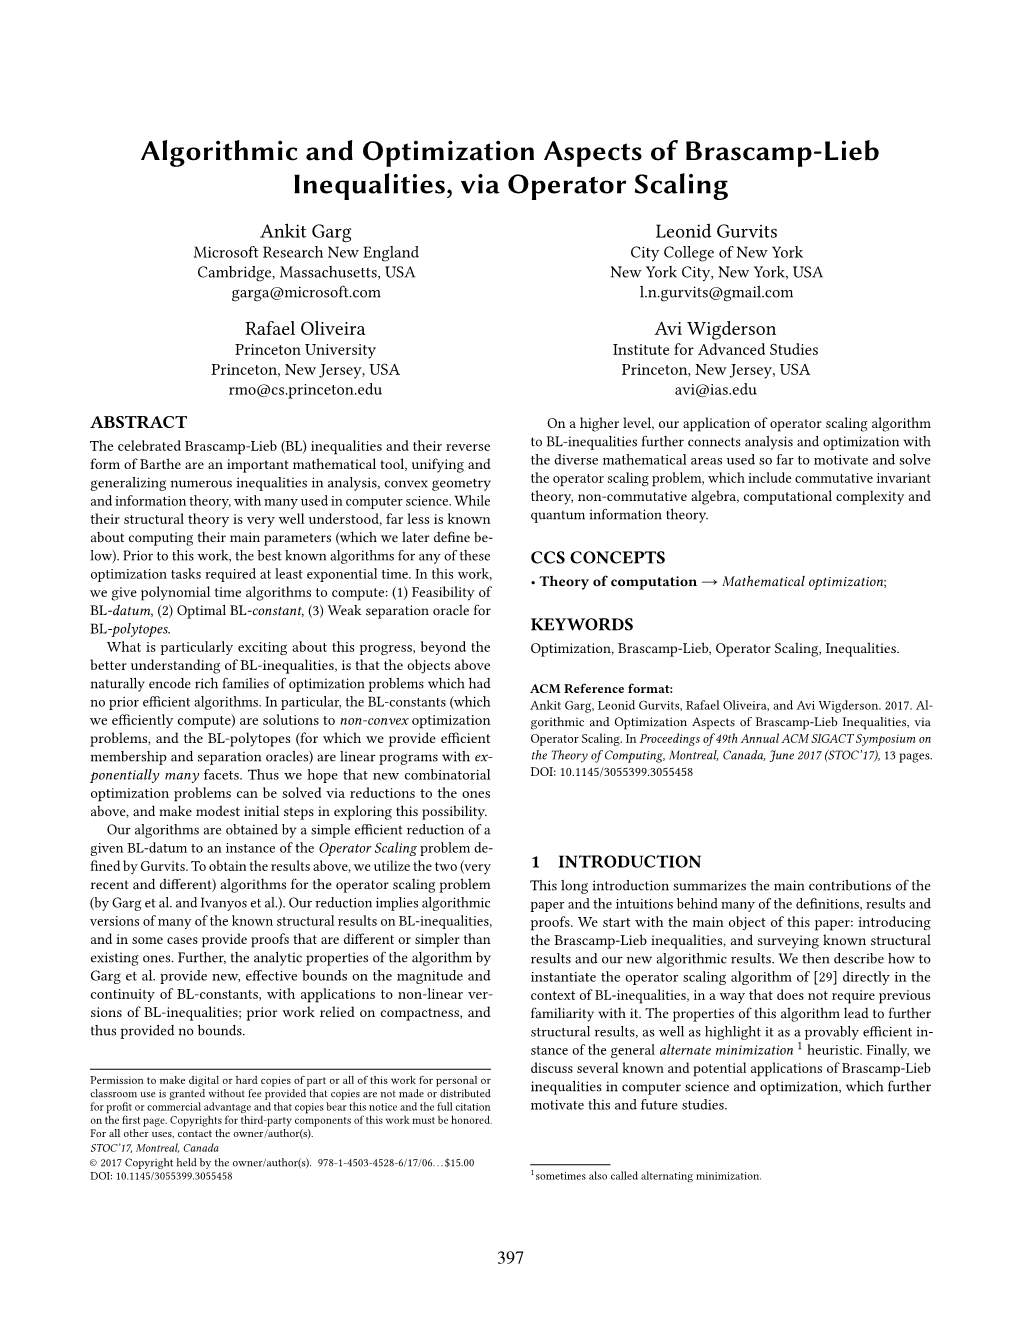 Algorithmic and Optimization Aspects of Brascamp-Lieb Inequalities, Via Operator Scaling